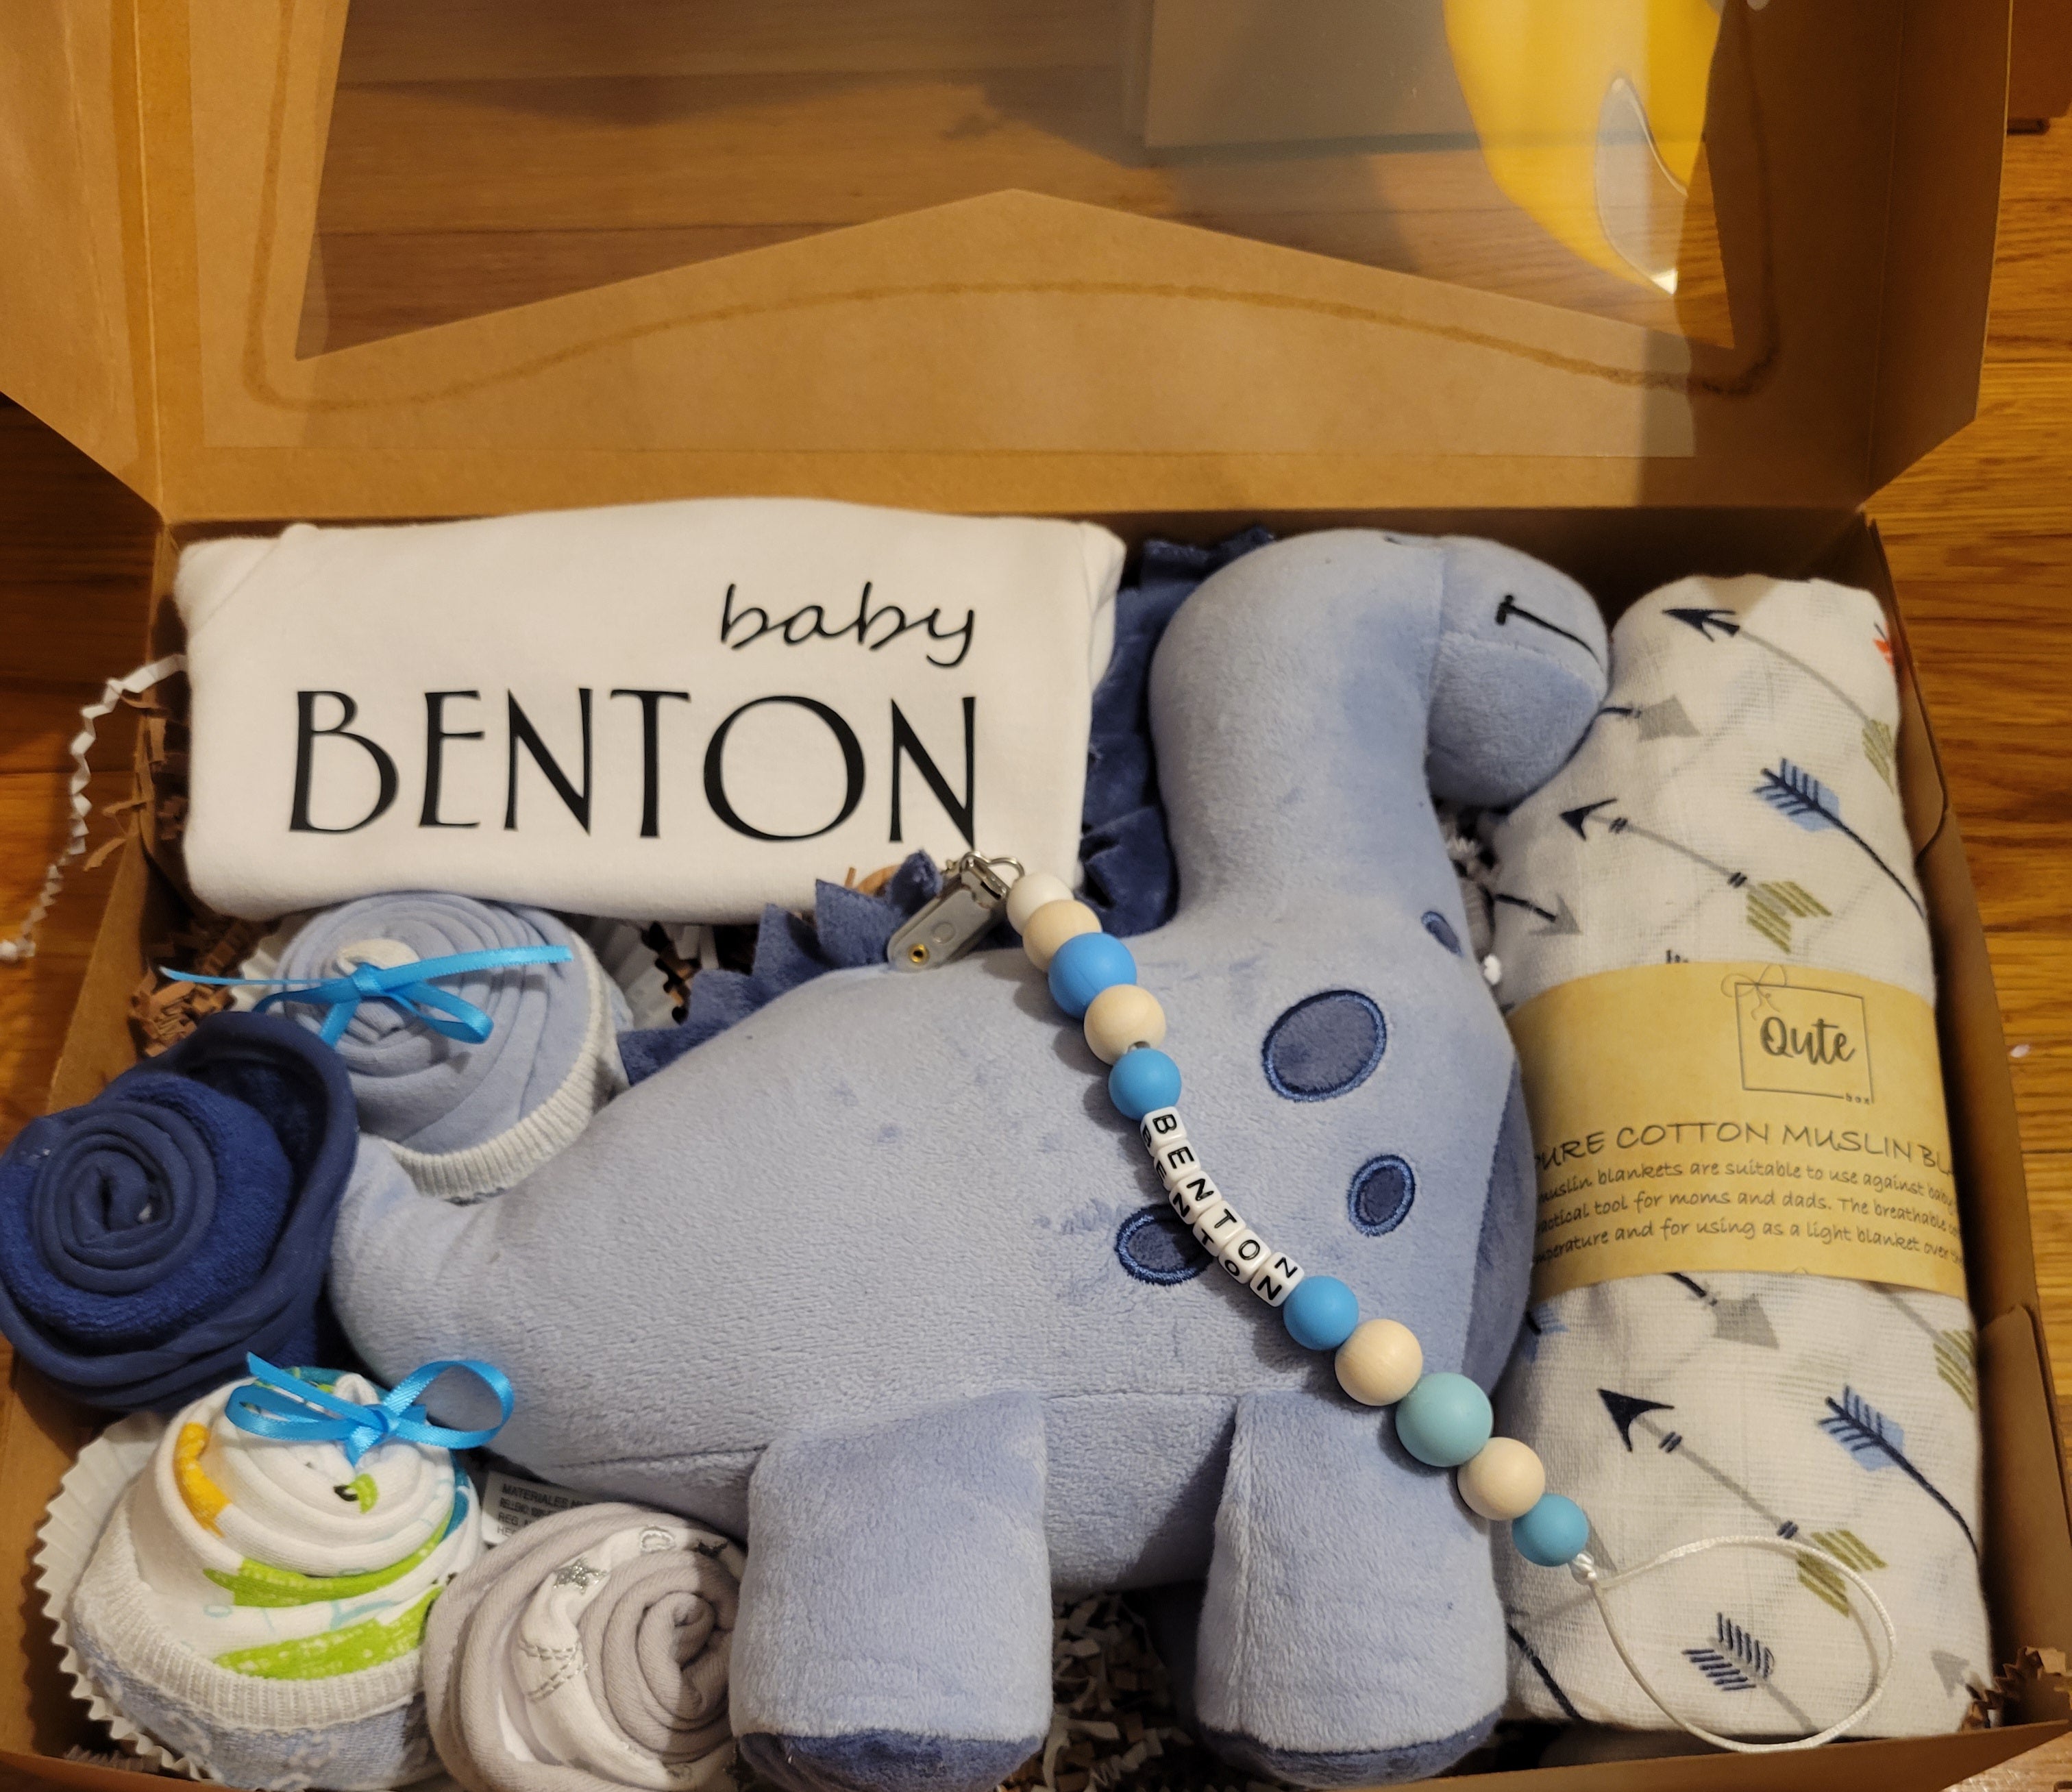 Online delivery of new baby gift baskets in Belgium | Brussels